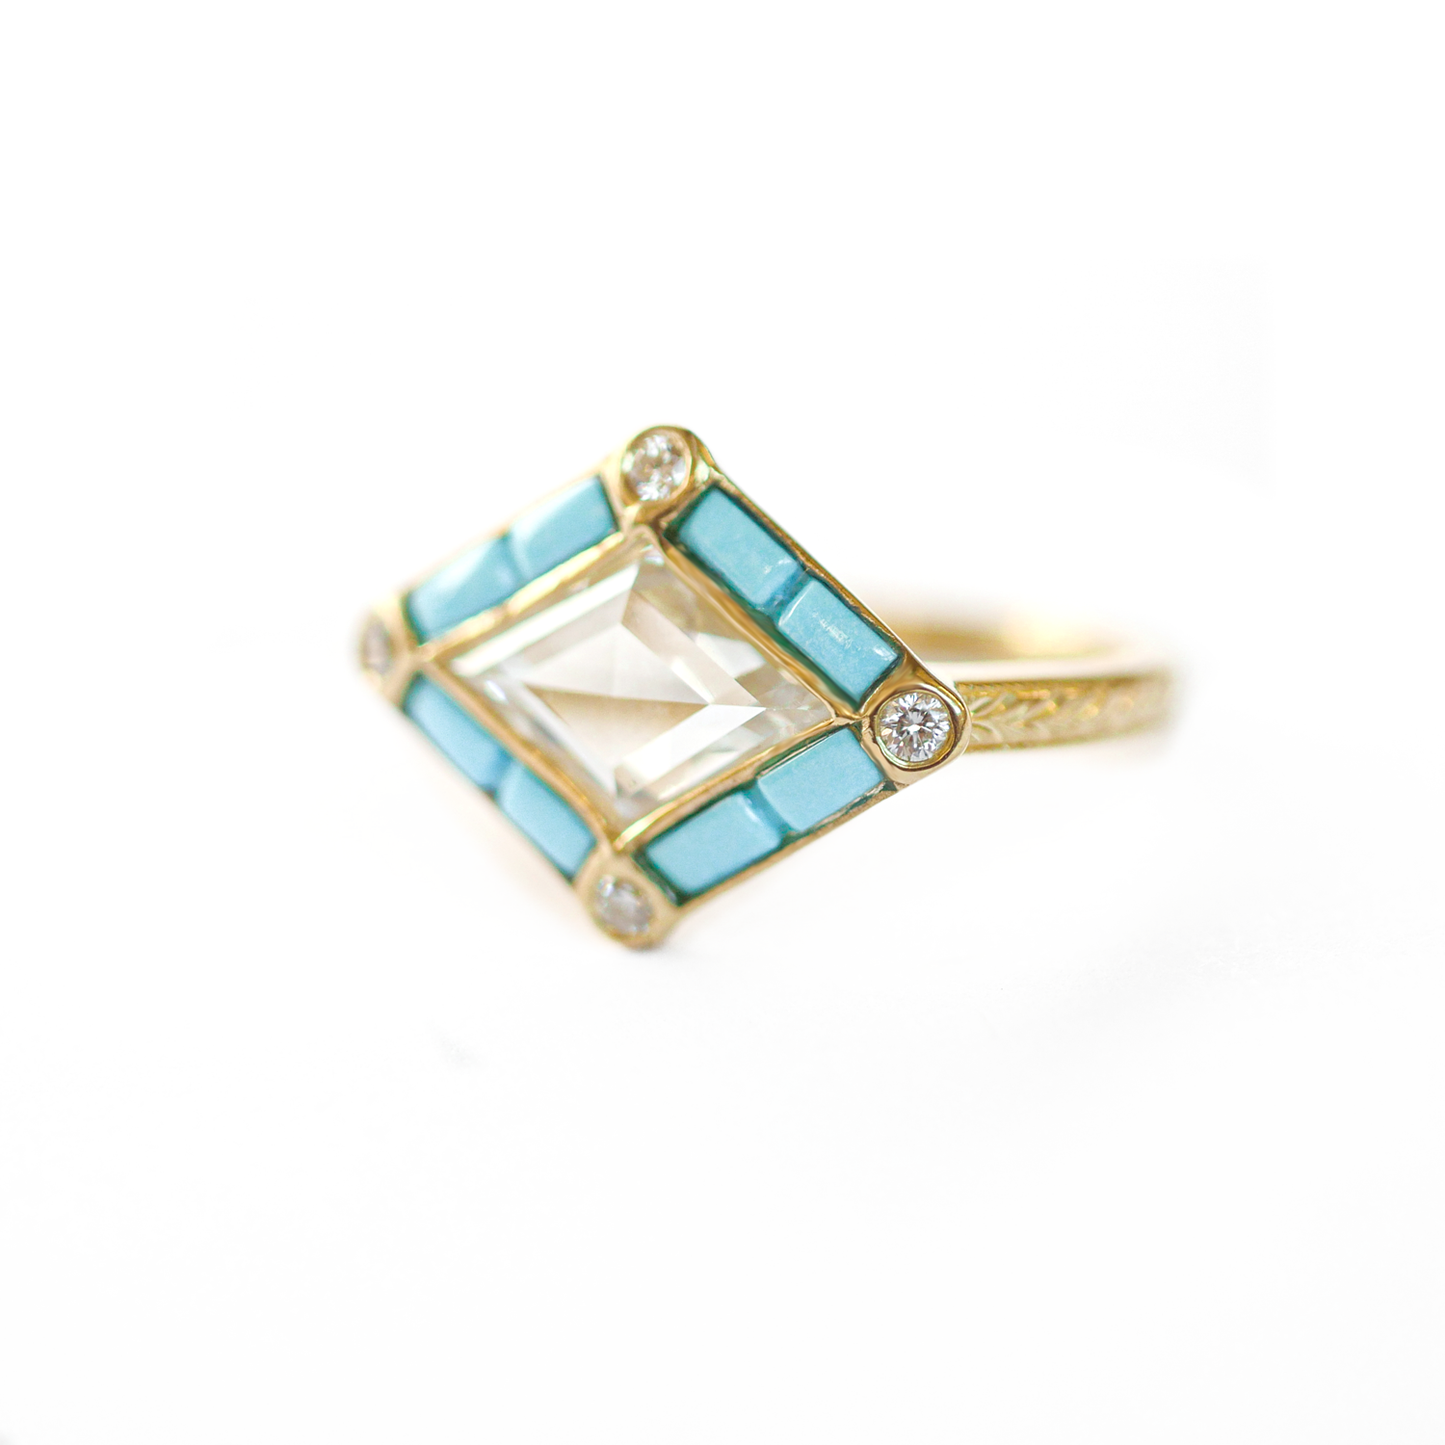 Rose Cut Kite Shaped Diamond Ring with Turquoise Halo